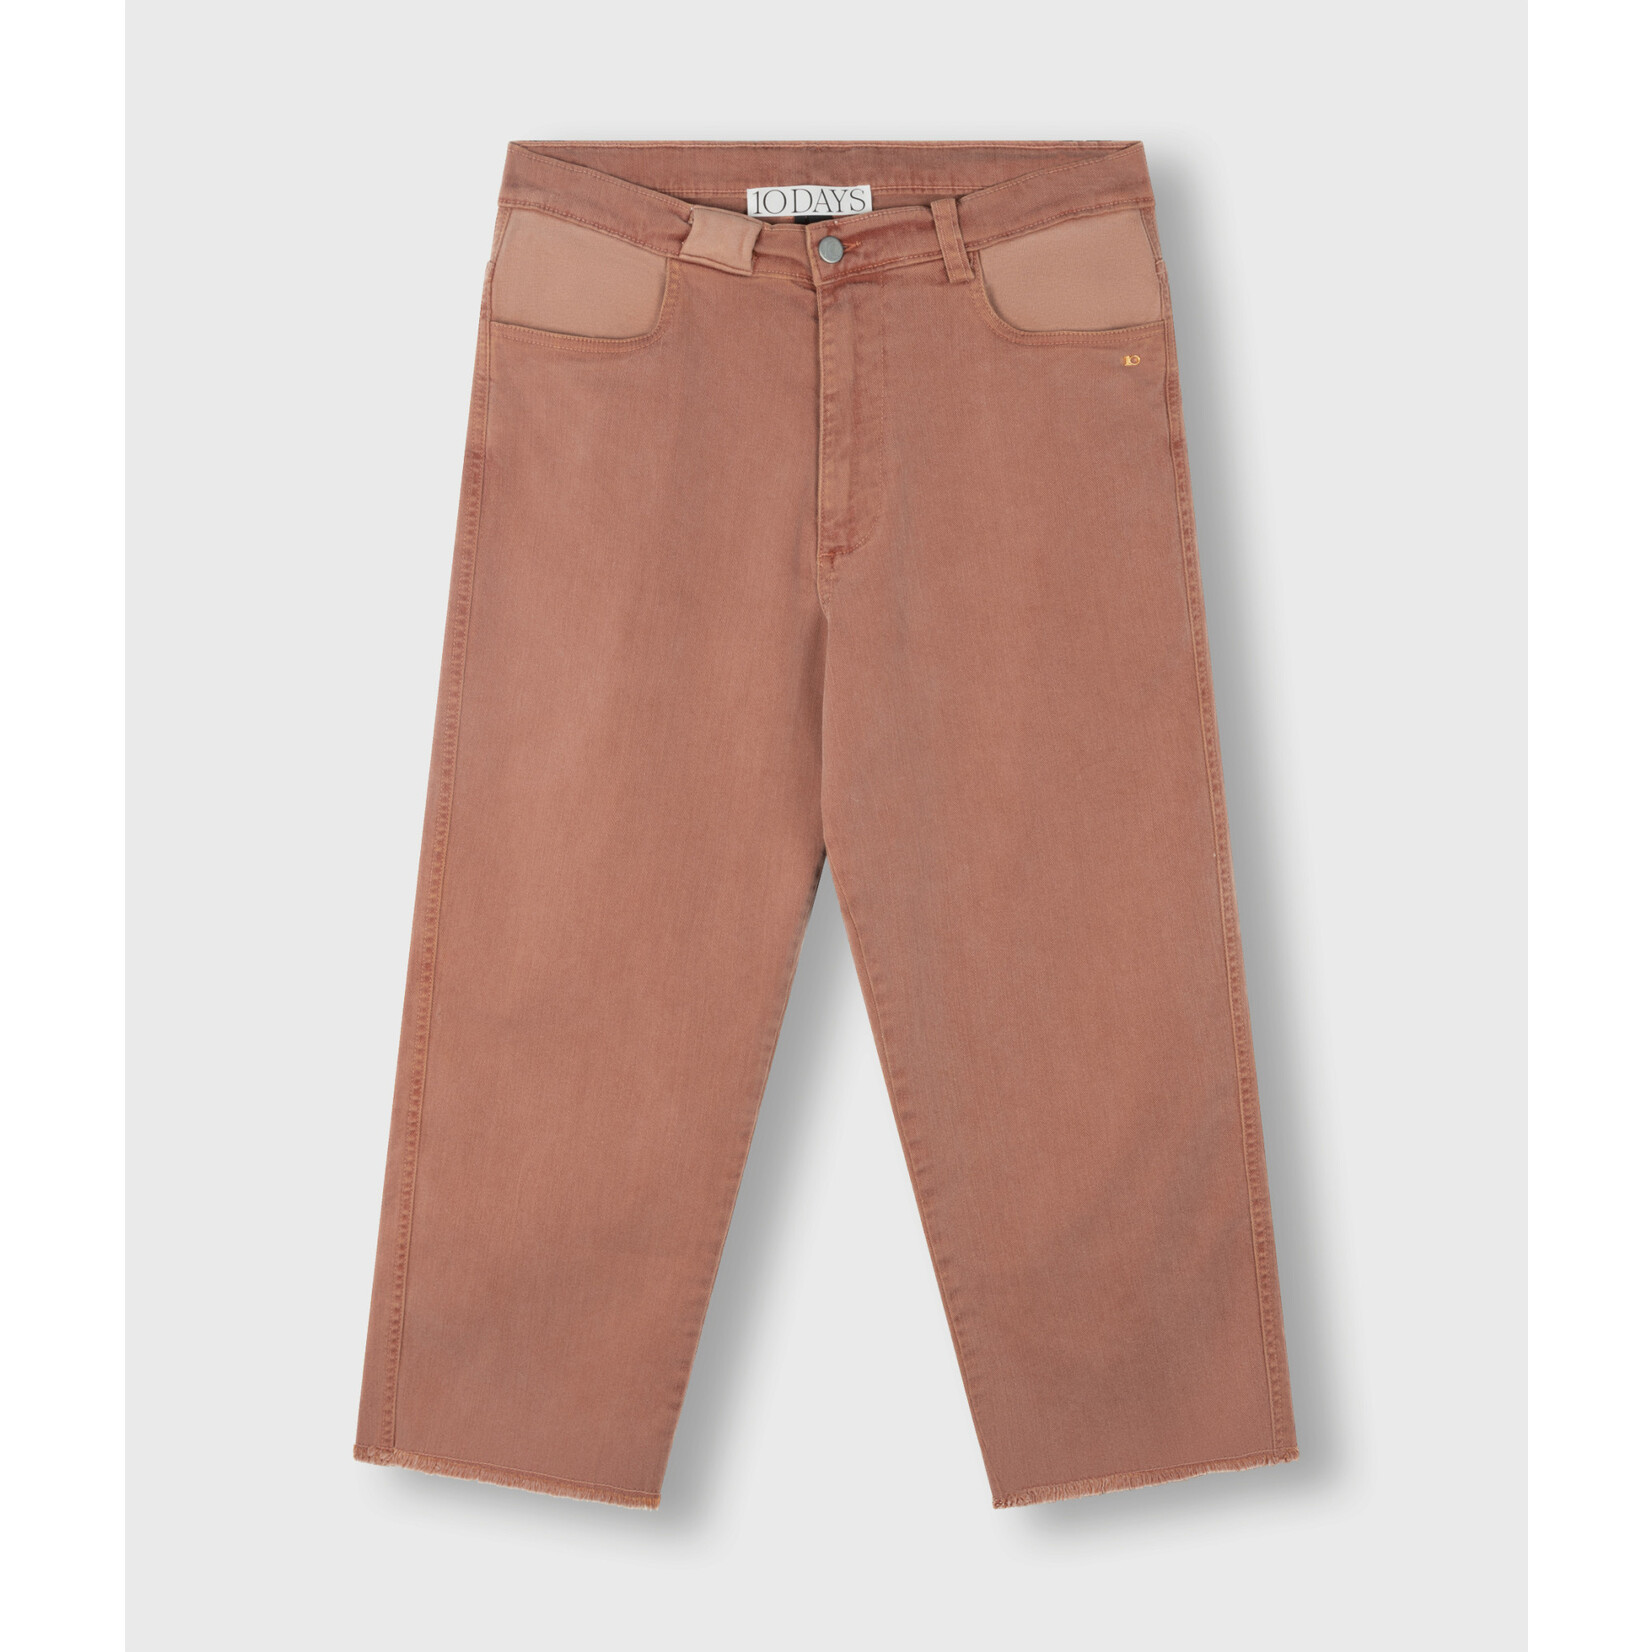 10Days Easy twill pants Saddle brown